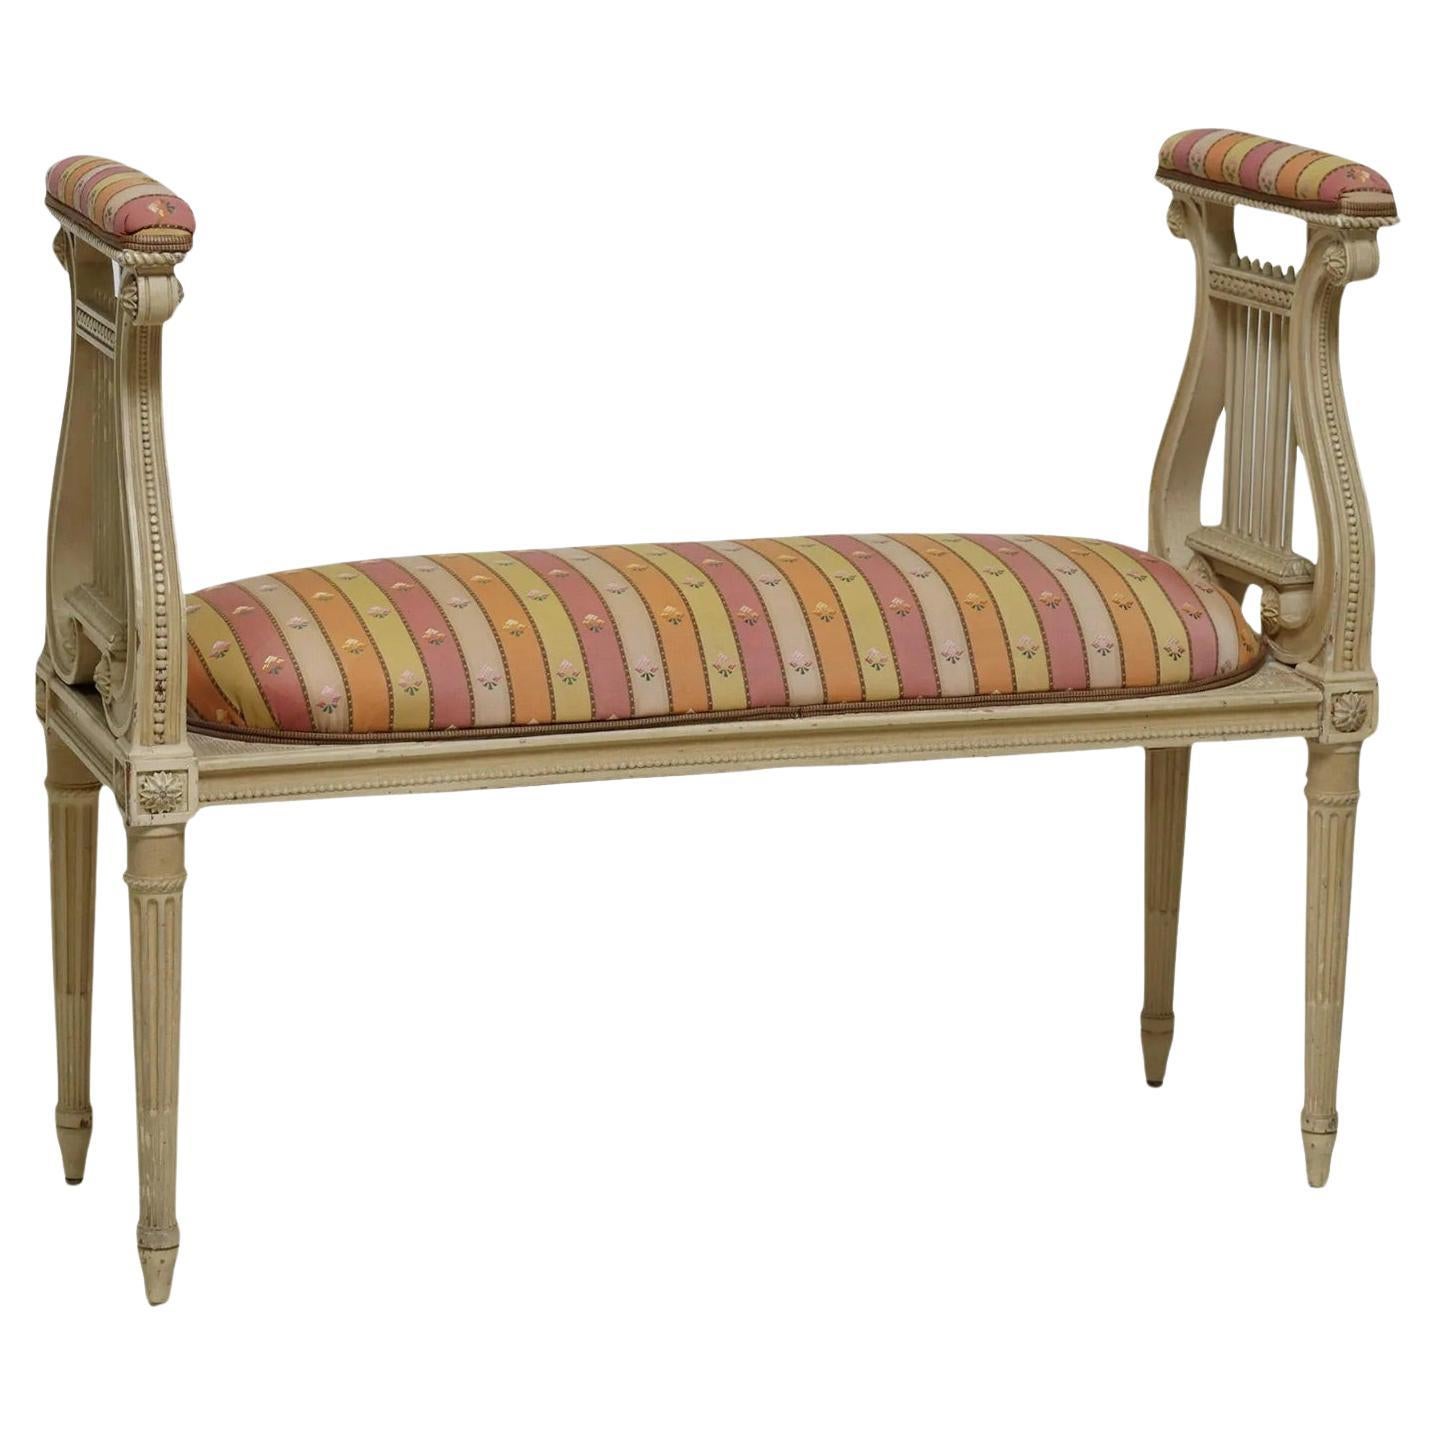 Vintage Louis XVI Style Upholstered Painted Lyre Bench For Sale